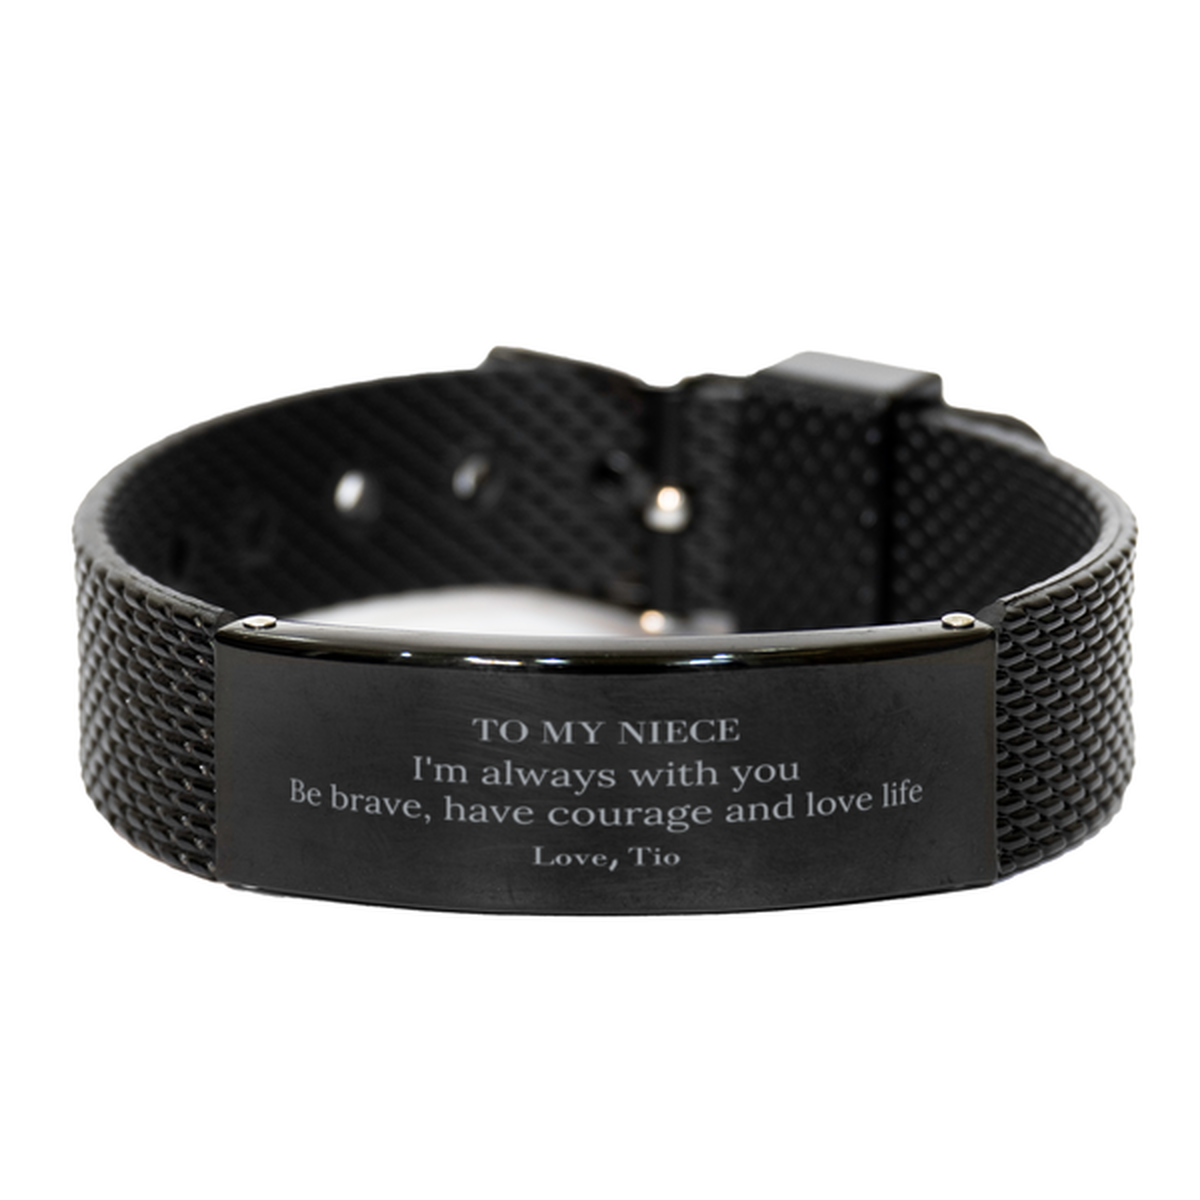 To My Niece Gifts from Tio, Unique Black Shark Mesh Bracelet Inspirational Christmas Birthday Graduation Gifts for Niece I'm always with you. Be brave, have courage and love life. Love, Tio